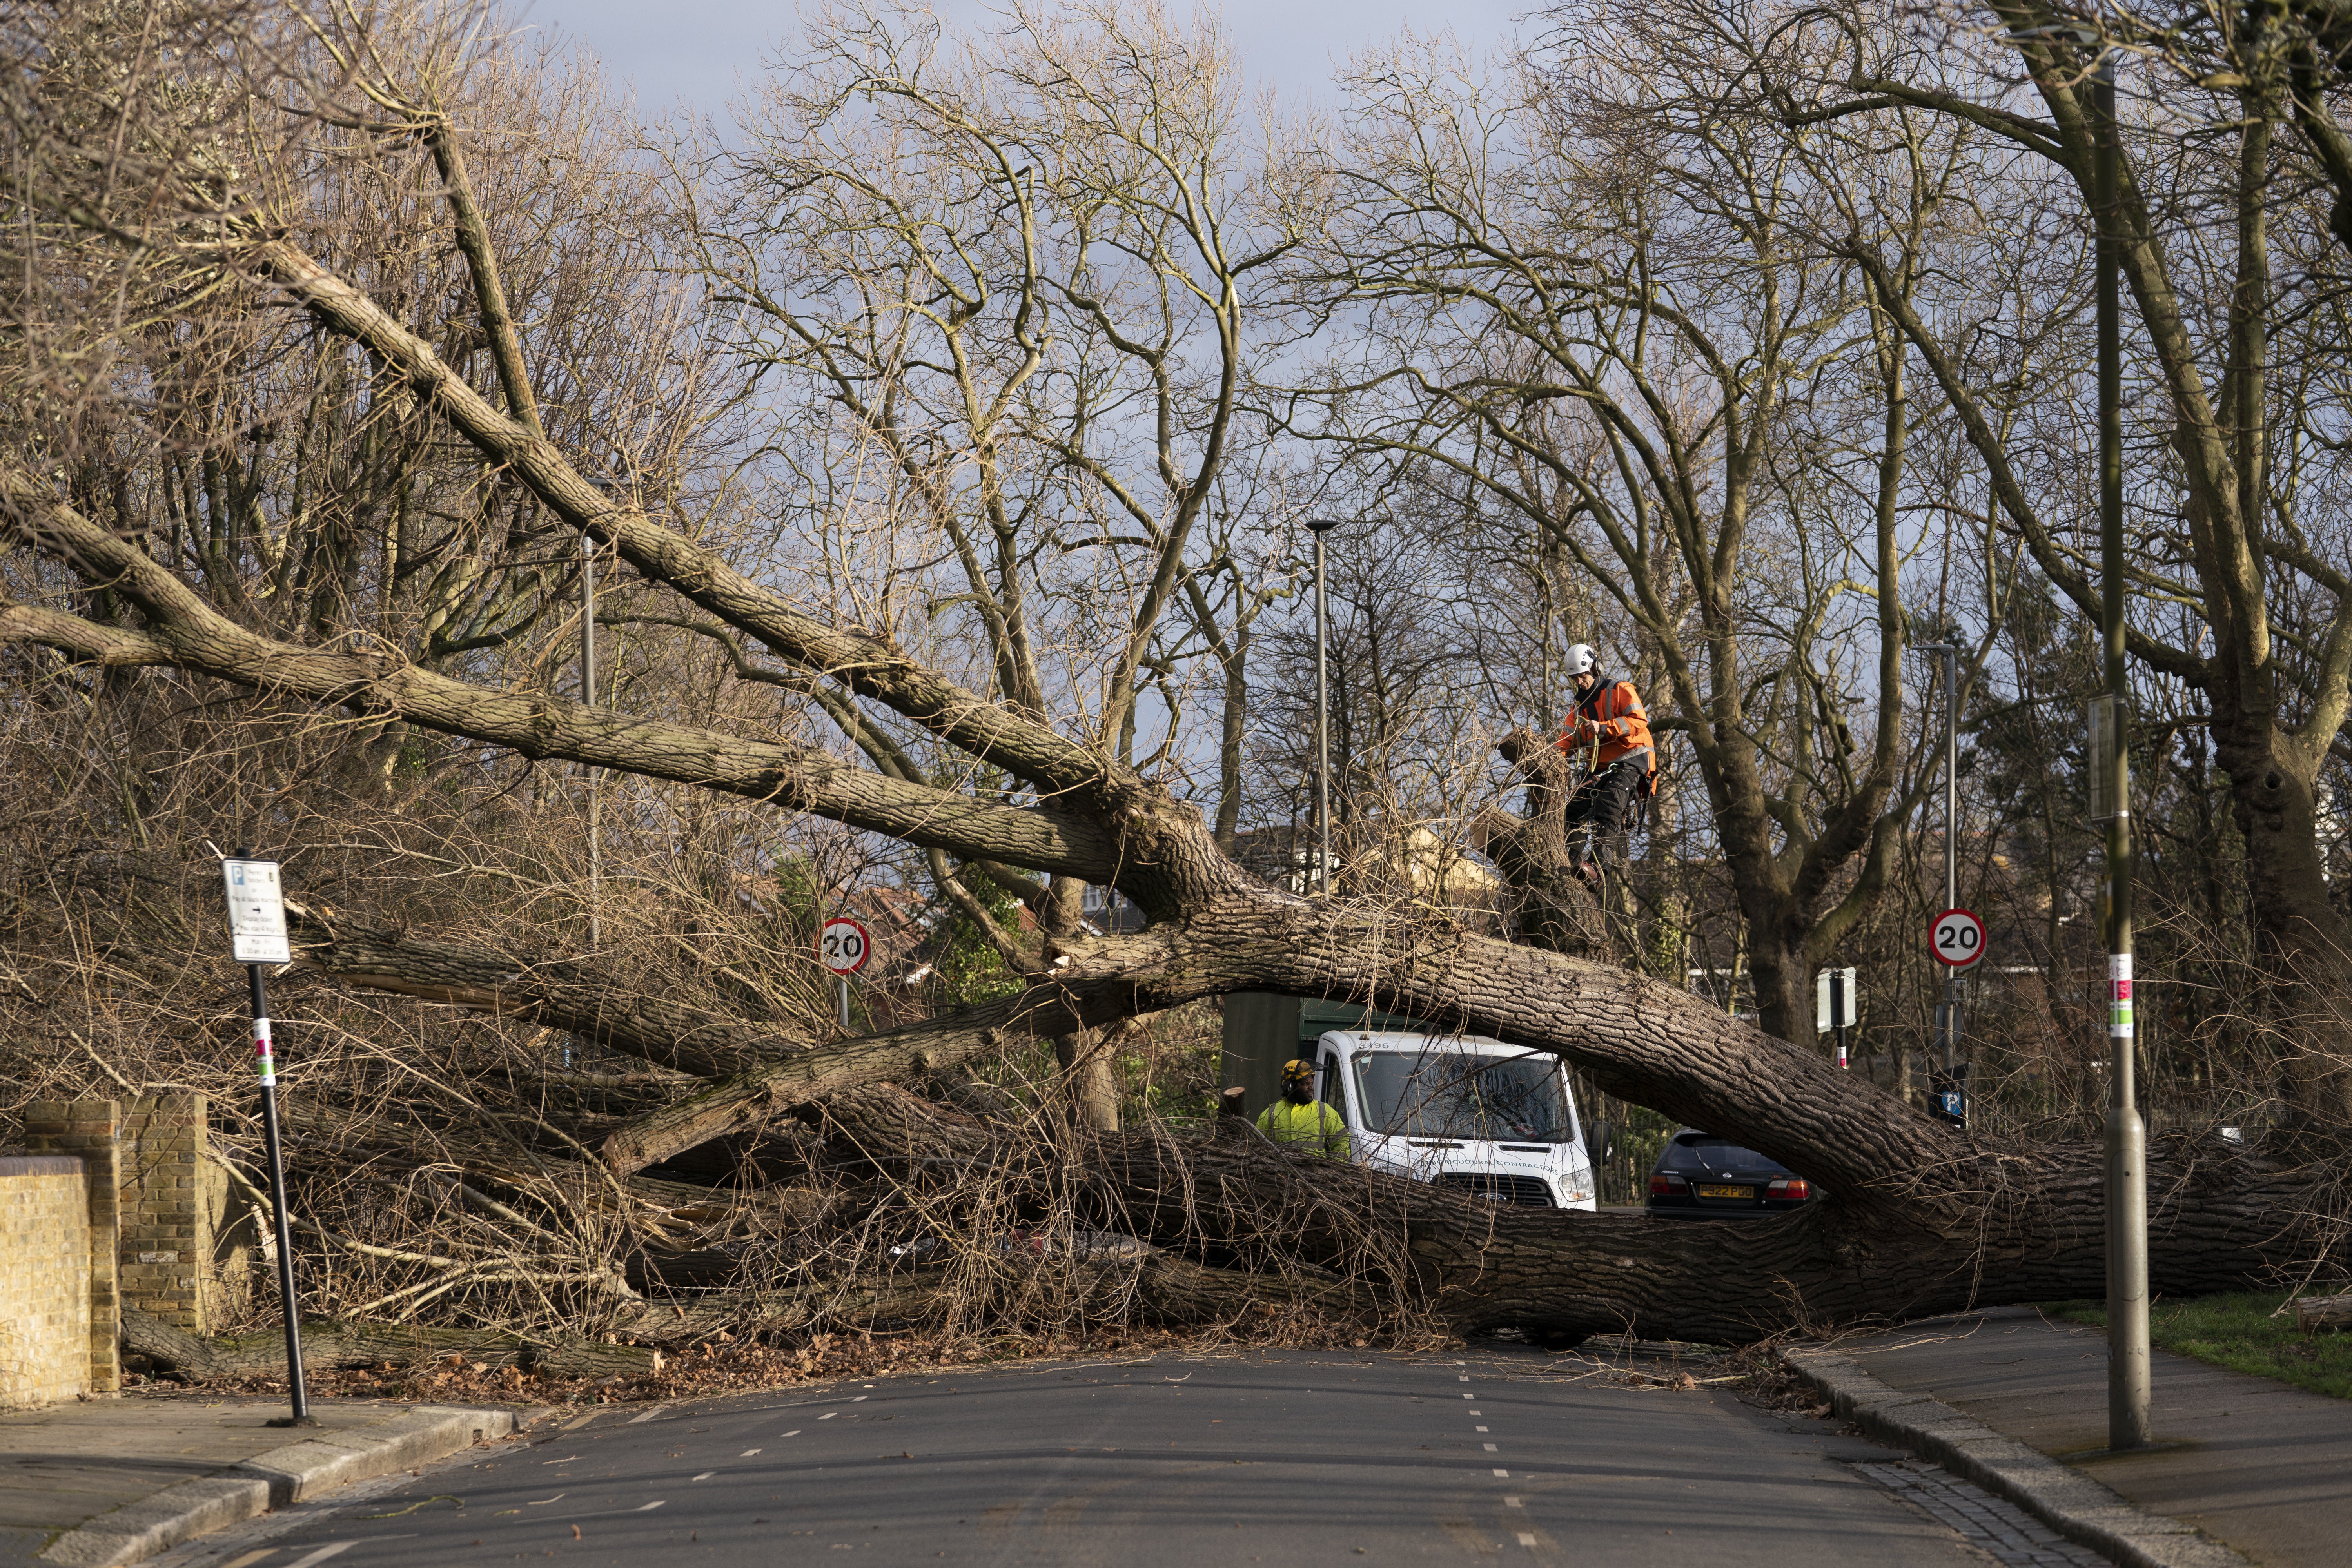 Millions of drivers heeded warnings to stay off the roads when Storm Eunice hit, new figures show (Kirsty O’Connor/PA)